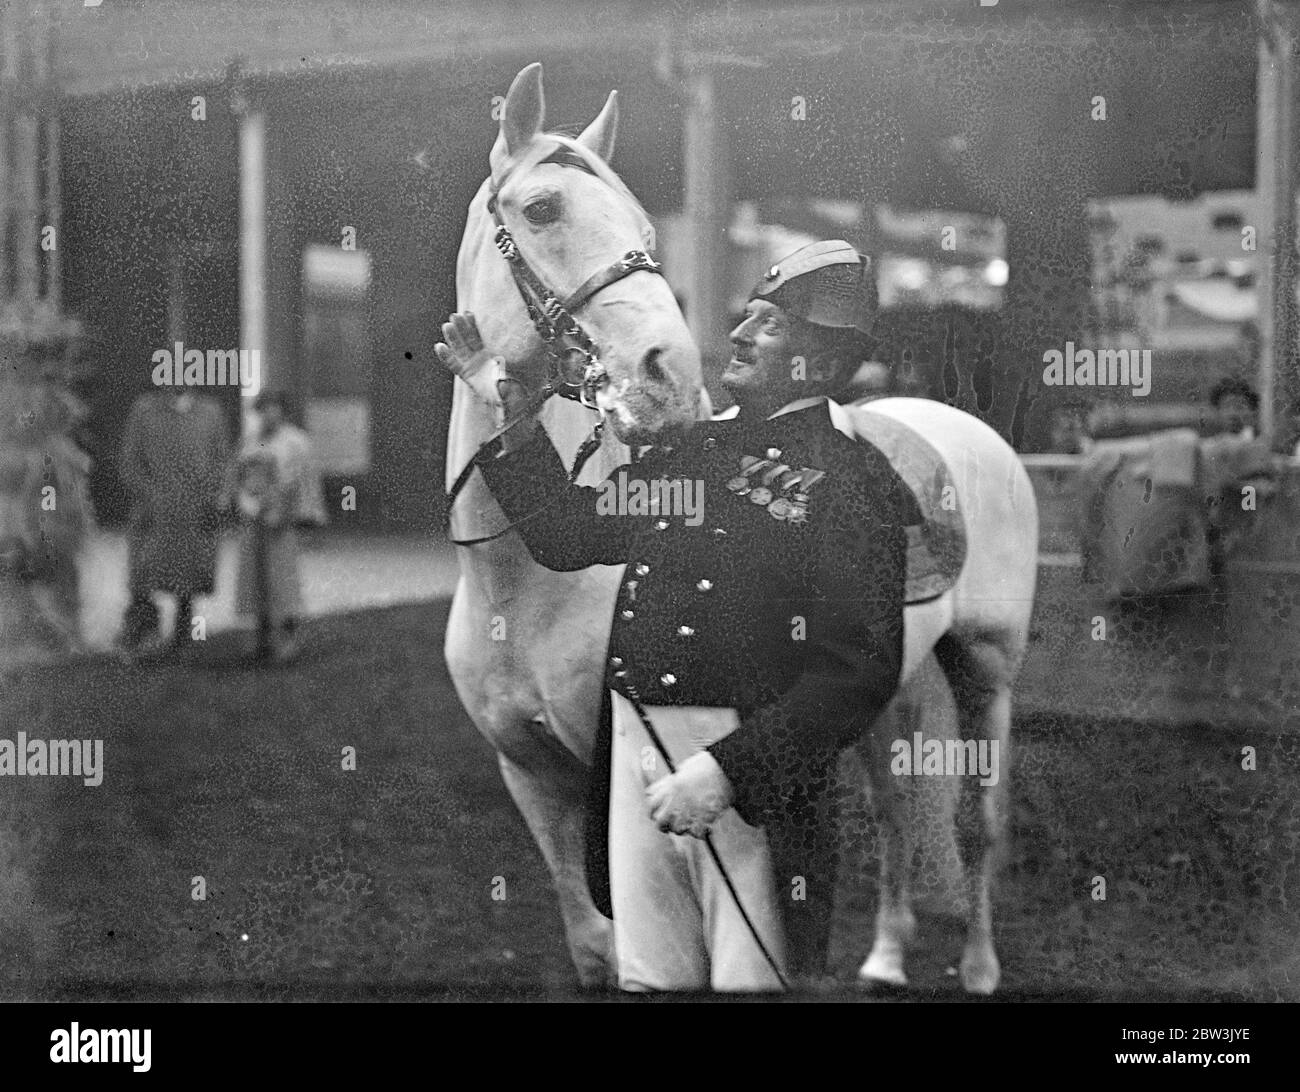 Leader of Viennese team for international horse show . Riders of the historic Imperial Riding School in Vienna rehearsed the equine ballet at Olympia , London in readiness for the International Horse Show opening May 30 . Photo shows , Chief Riding Master Herr Zrust and his horse Elizabeth . He is the leader of the team . 28 May 1936 Stock Photo